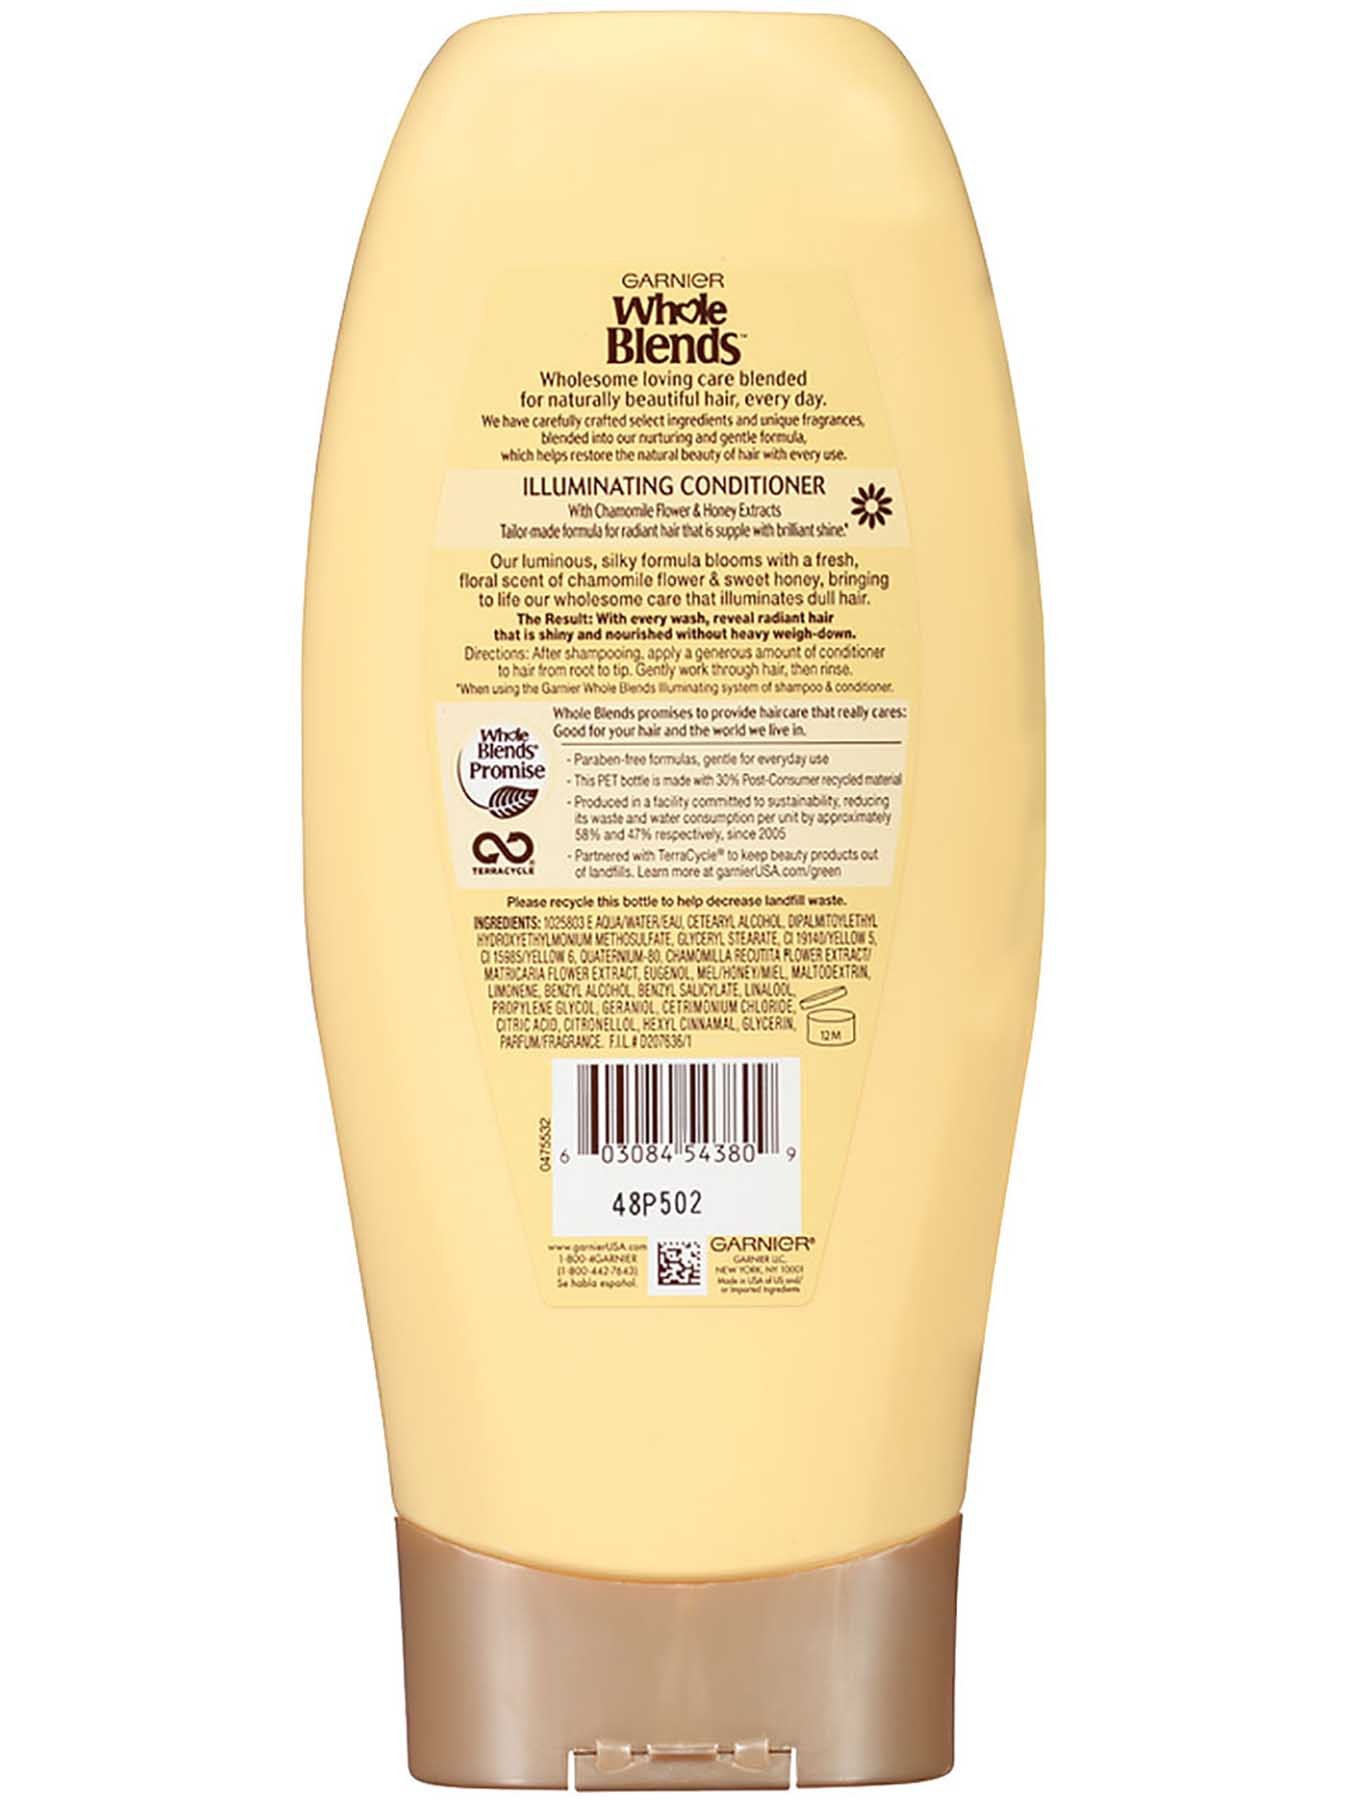 Back view of Illuminating Conditioner with Chamomile Flower and Honey Extracts, Silicone-Free.